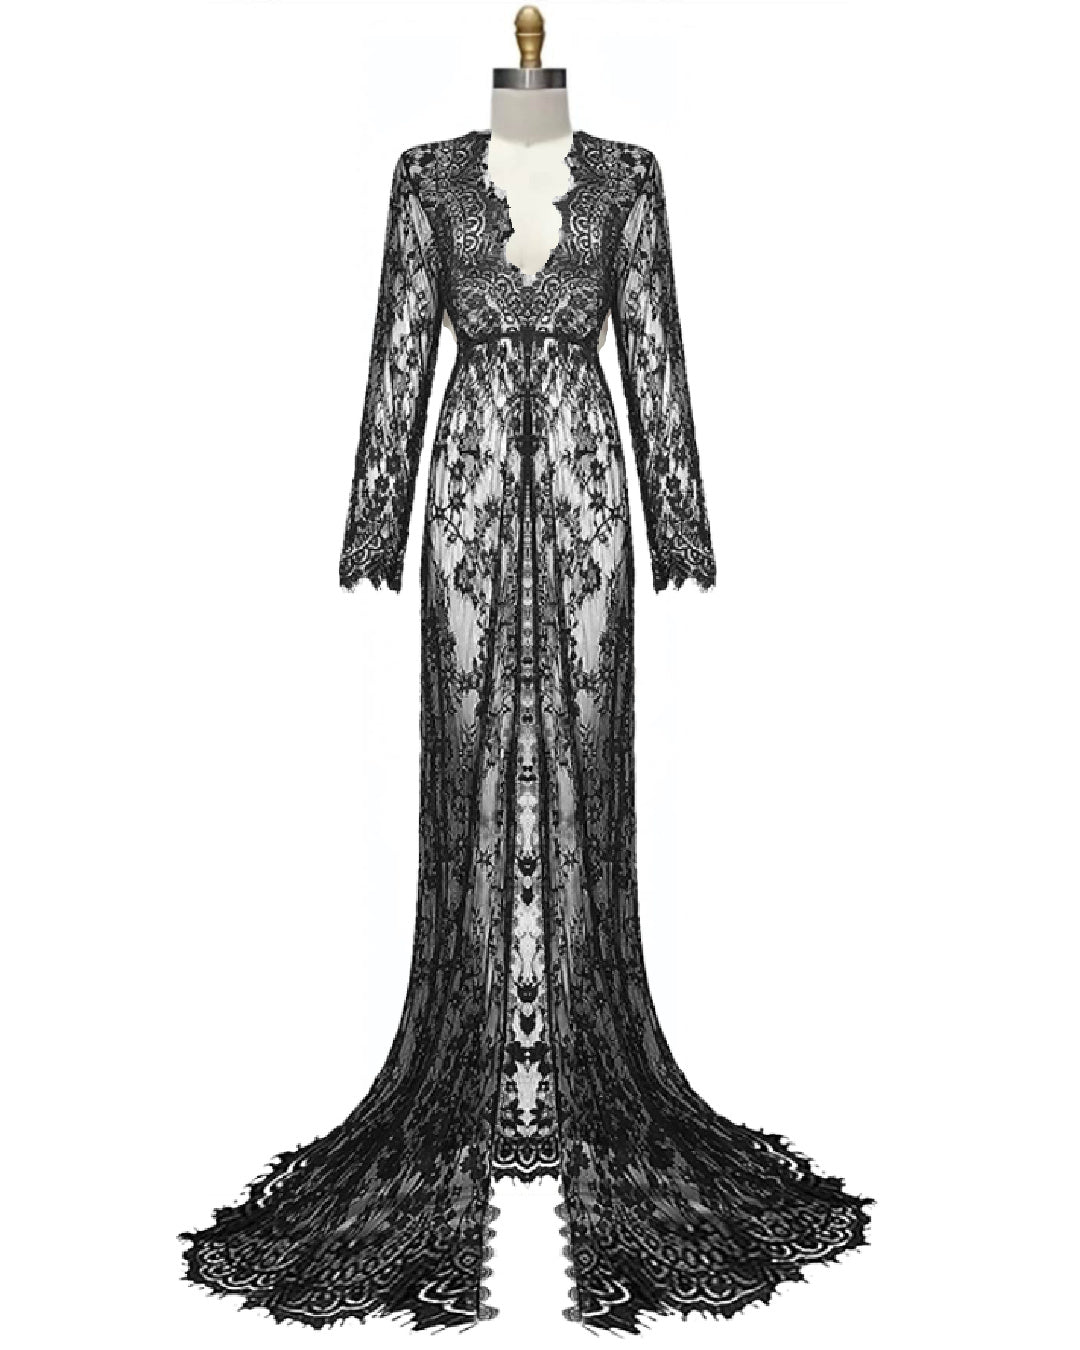 Claudette- the Haunting Sheer Lace Overdress Robe Black or White